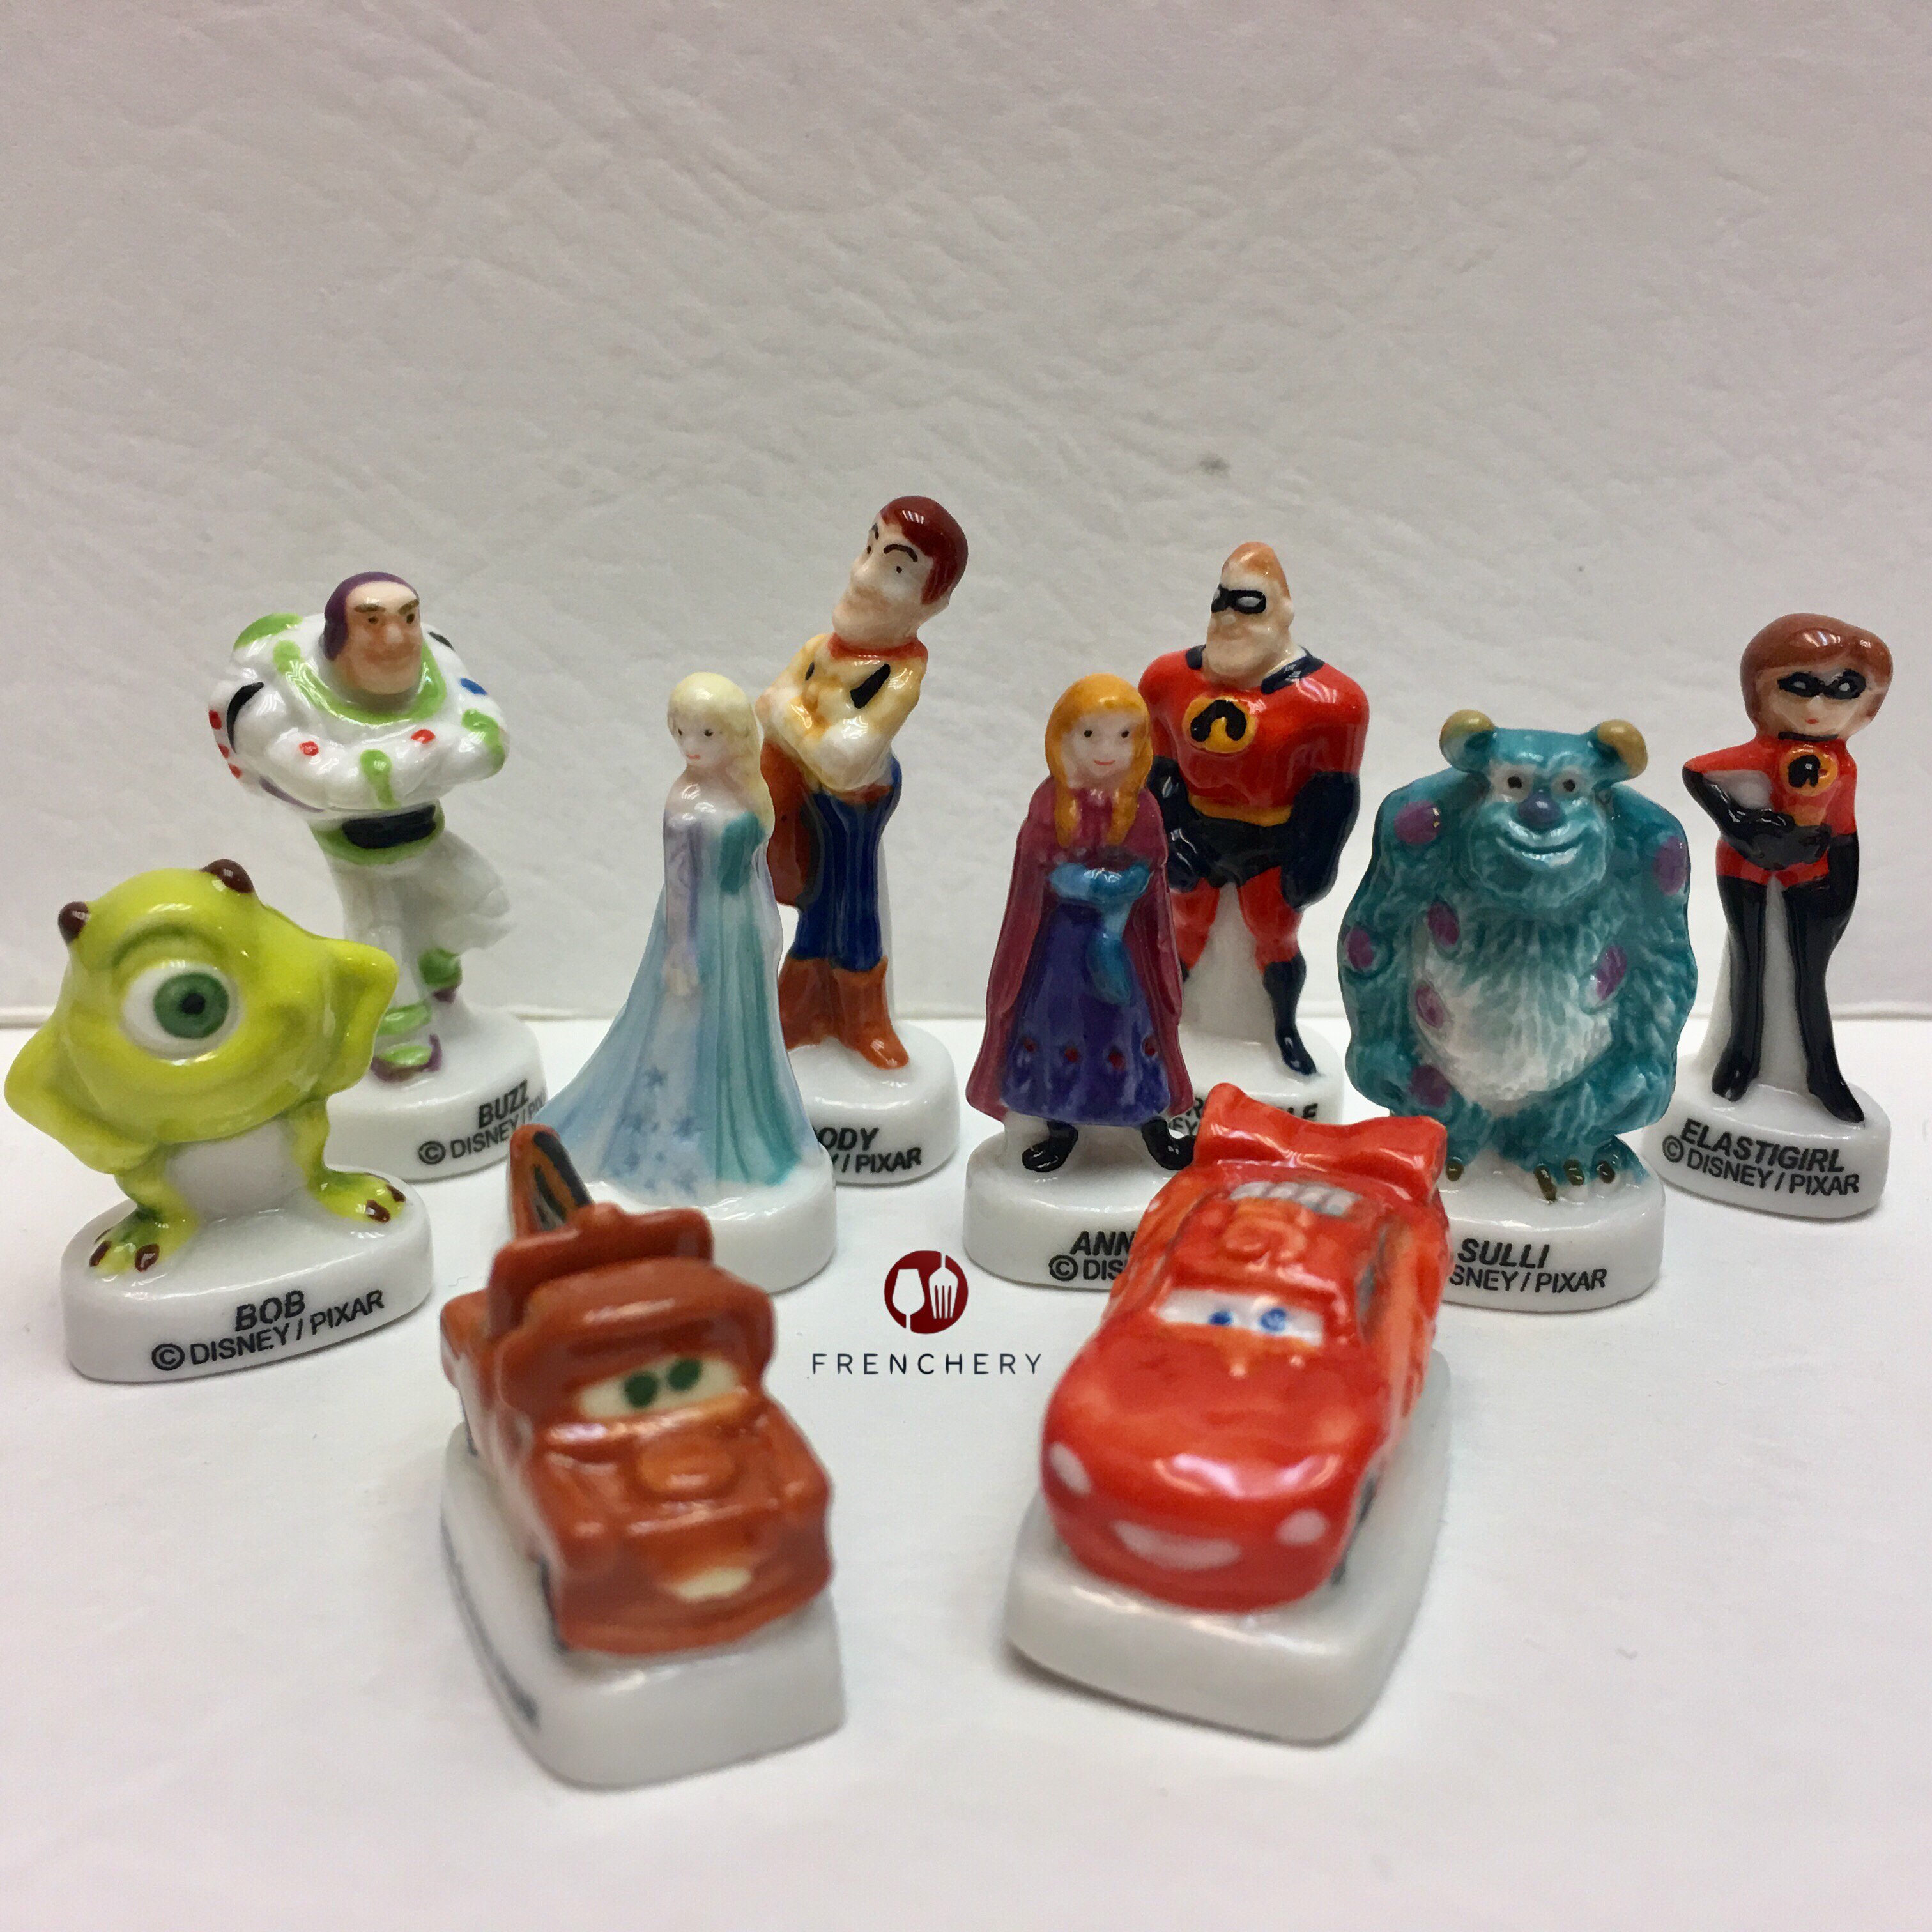 Frenchery on X: Just In: #Disney Santons Ceramic Figurines. These are  small Fèves for your Galette des Rois or King's Cake!    / X